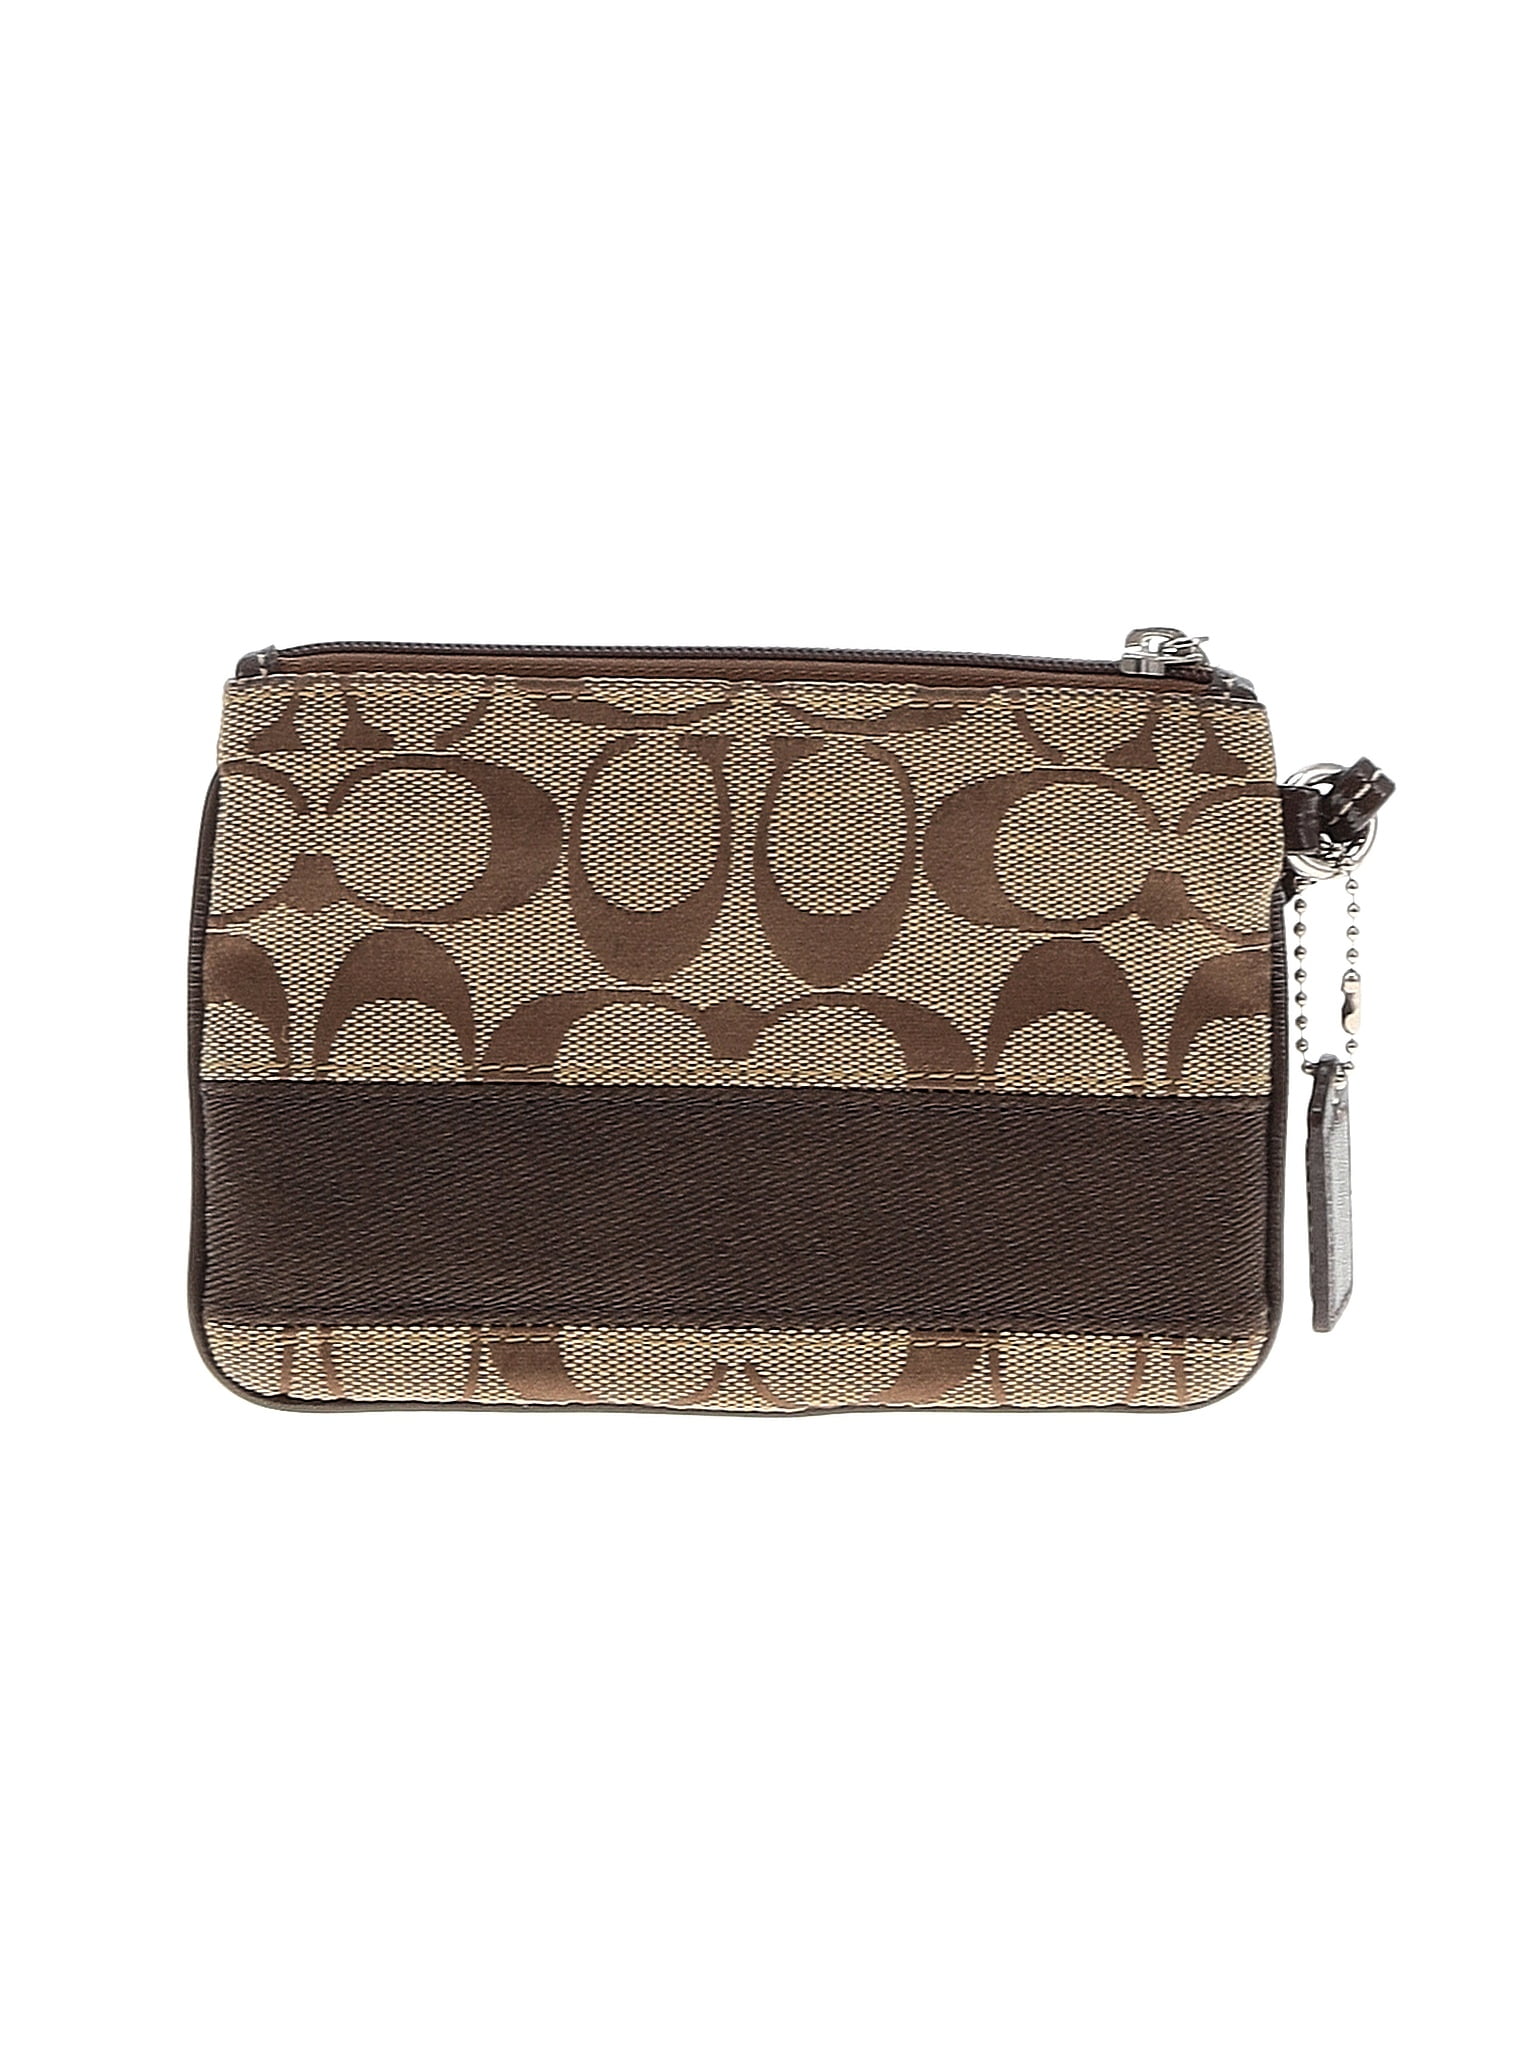 COACH Small Wristlet in Leather in Brown